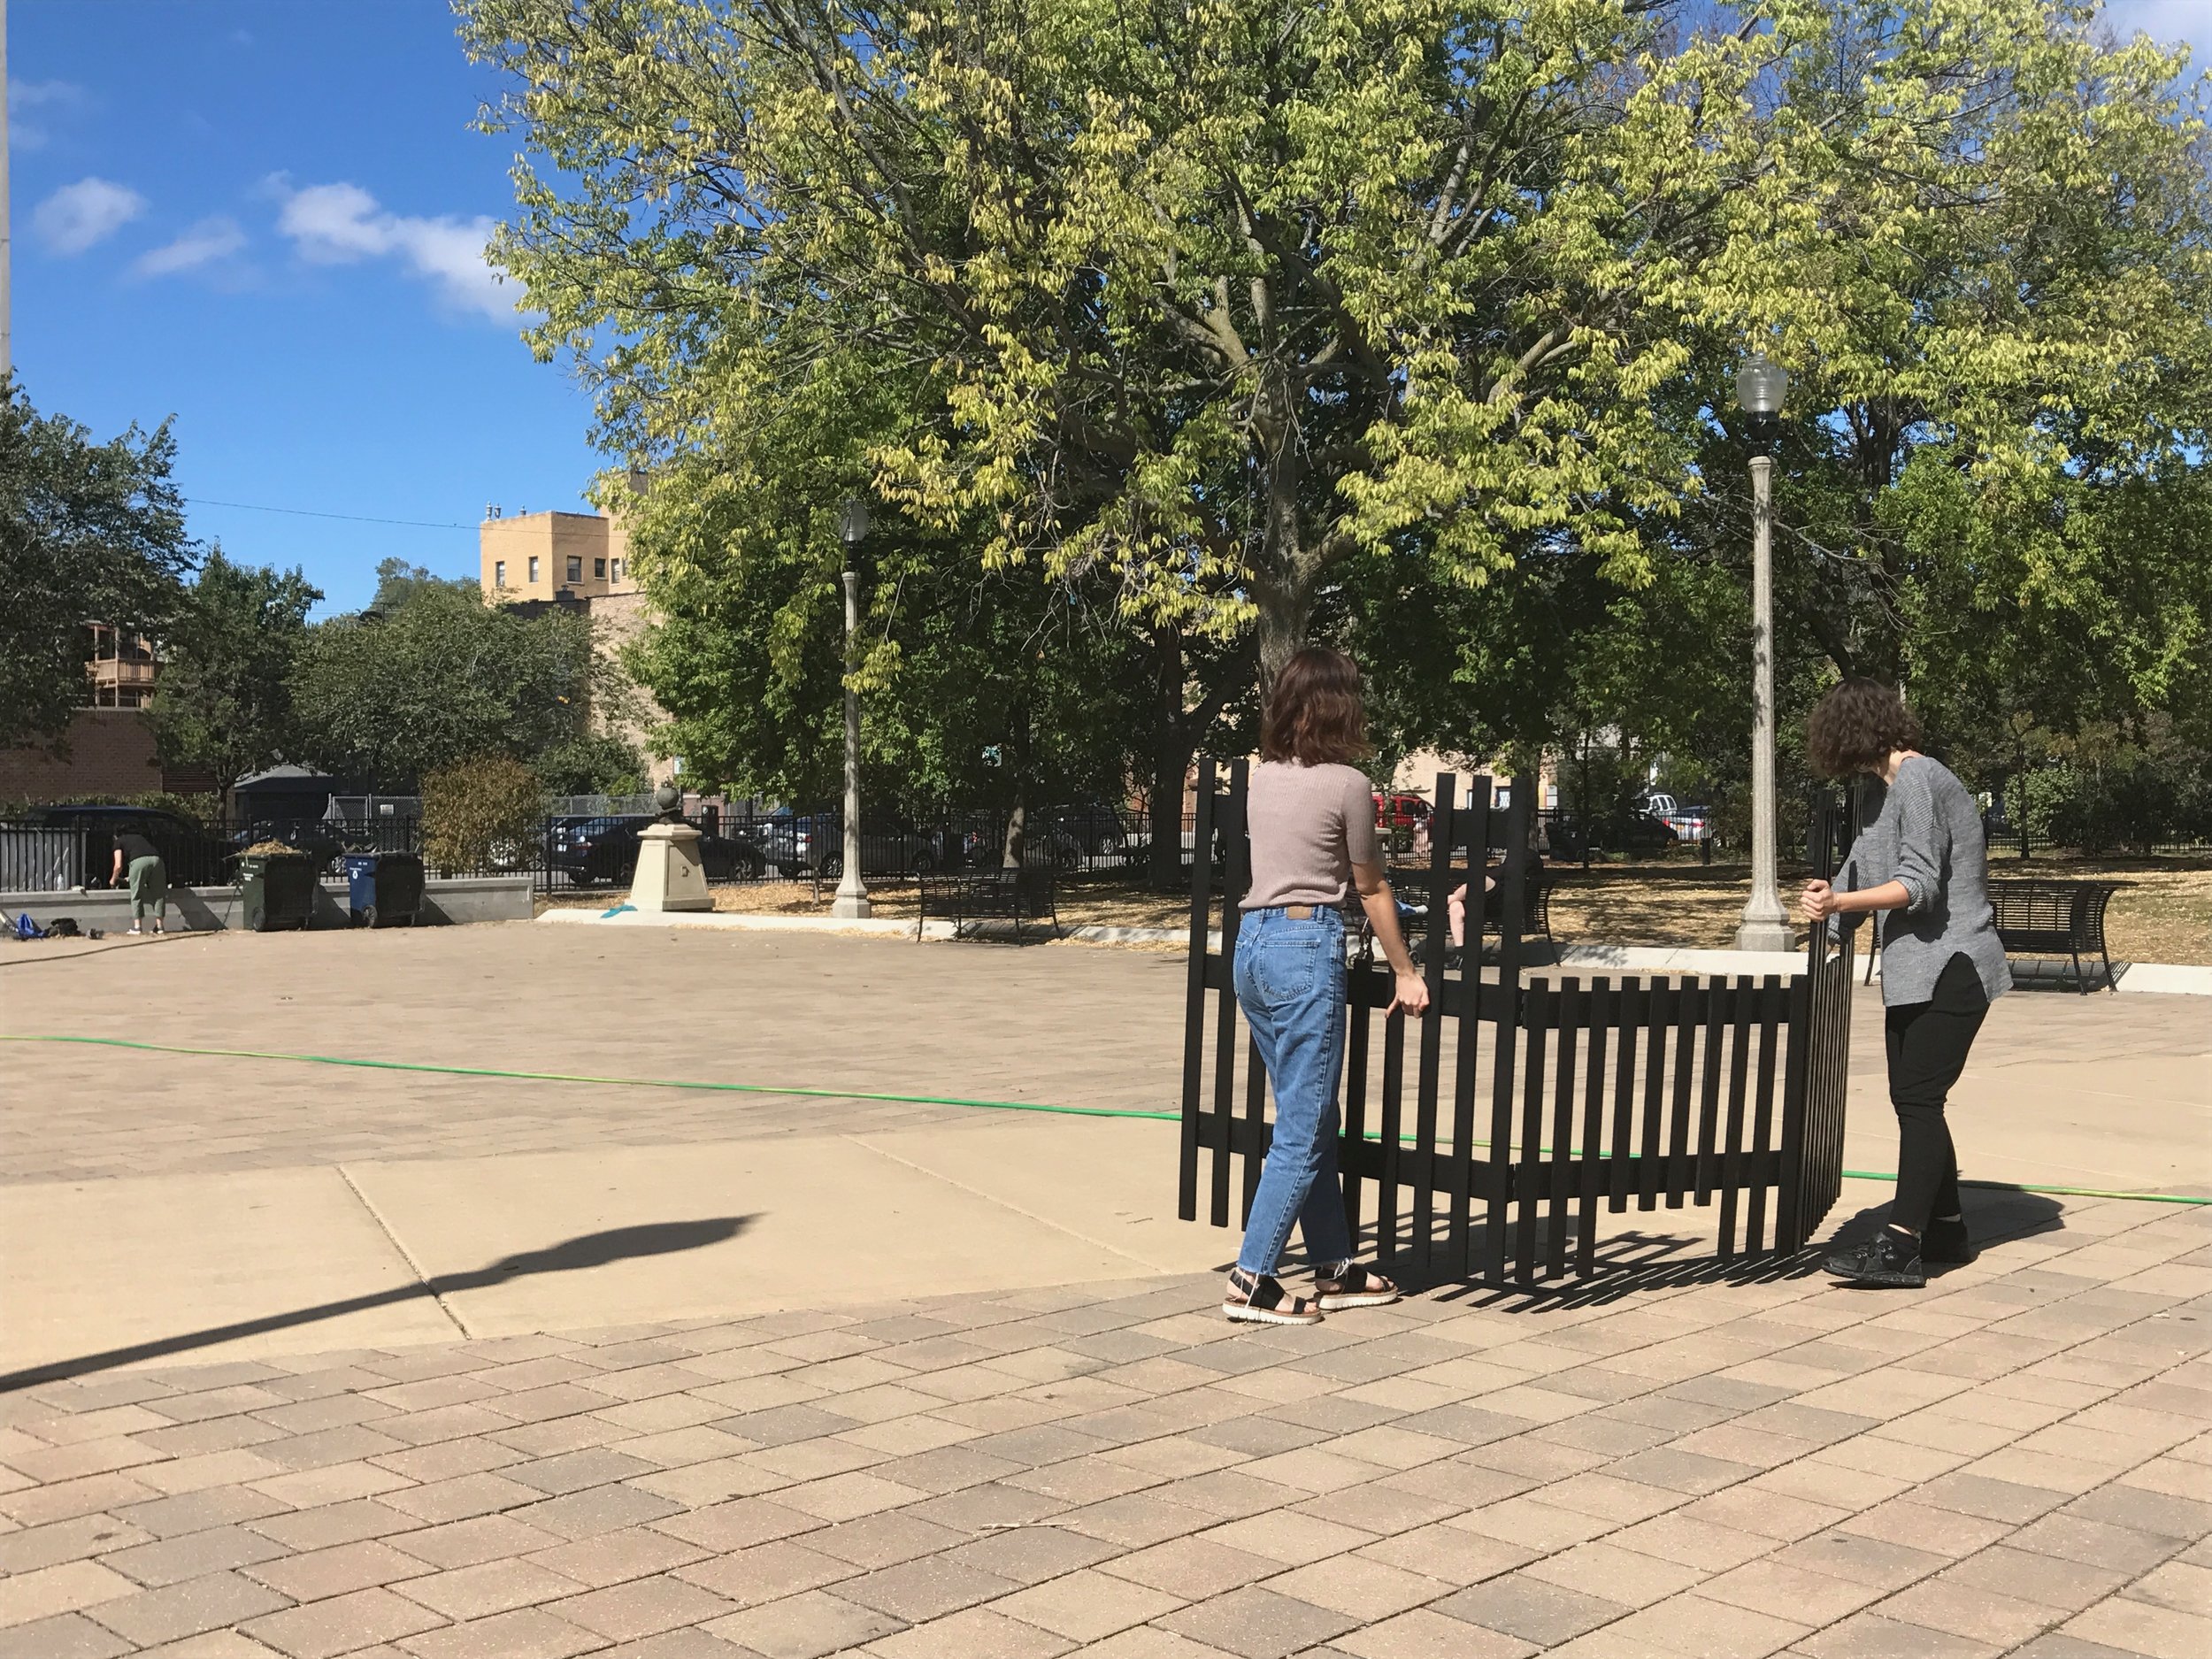  As a part of Terrain Biennial, a public art festival with locations throughout Chicago and the country, I held a durational performance in which I invited patrons of Buttercup Park to move with a fence that I constructed specifically for the park. D